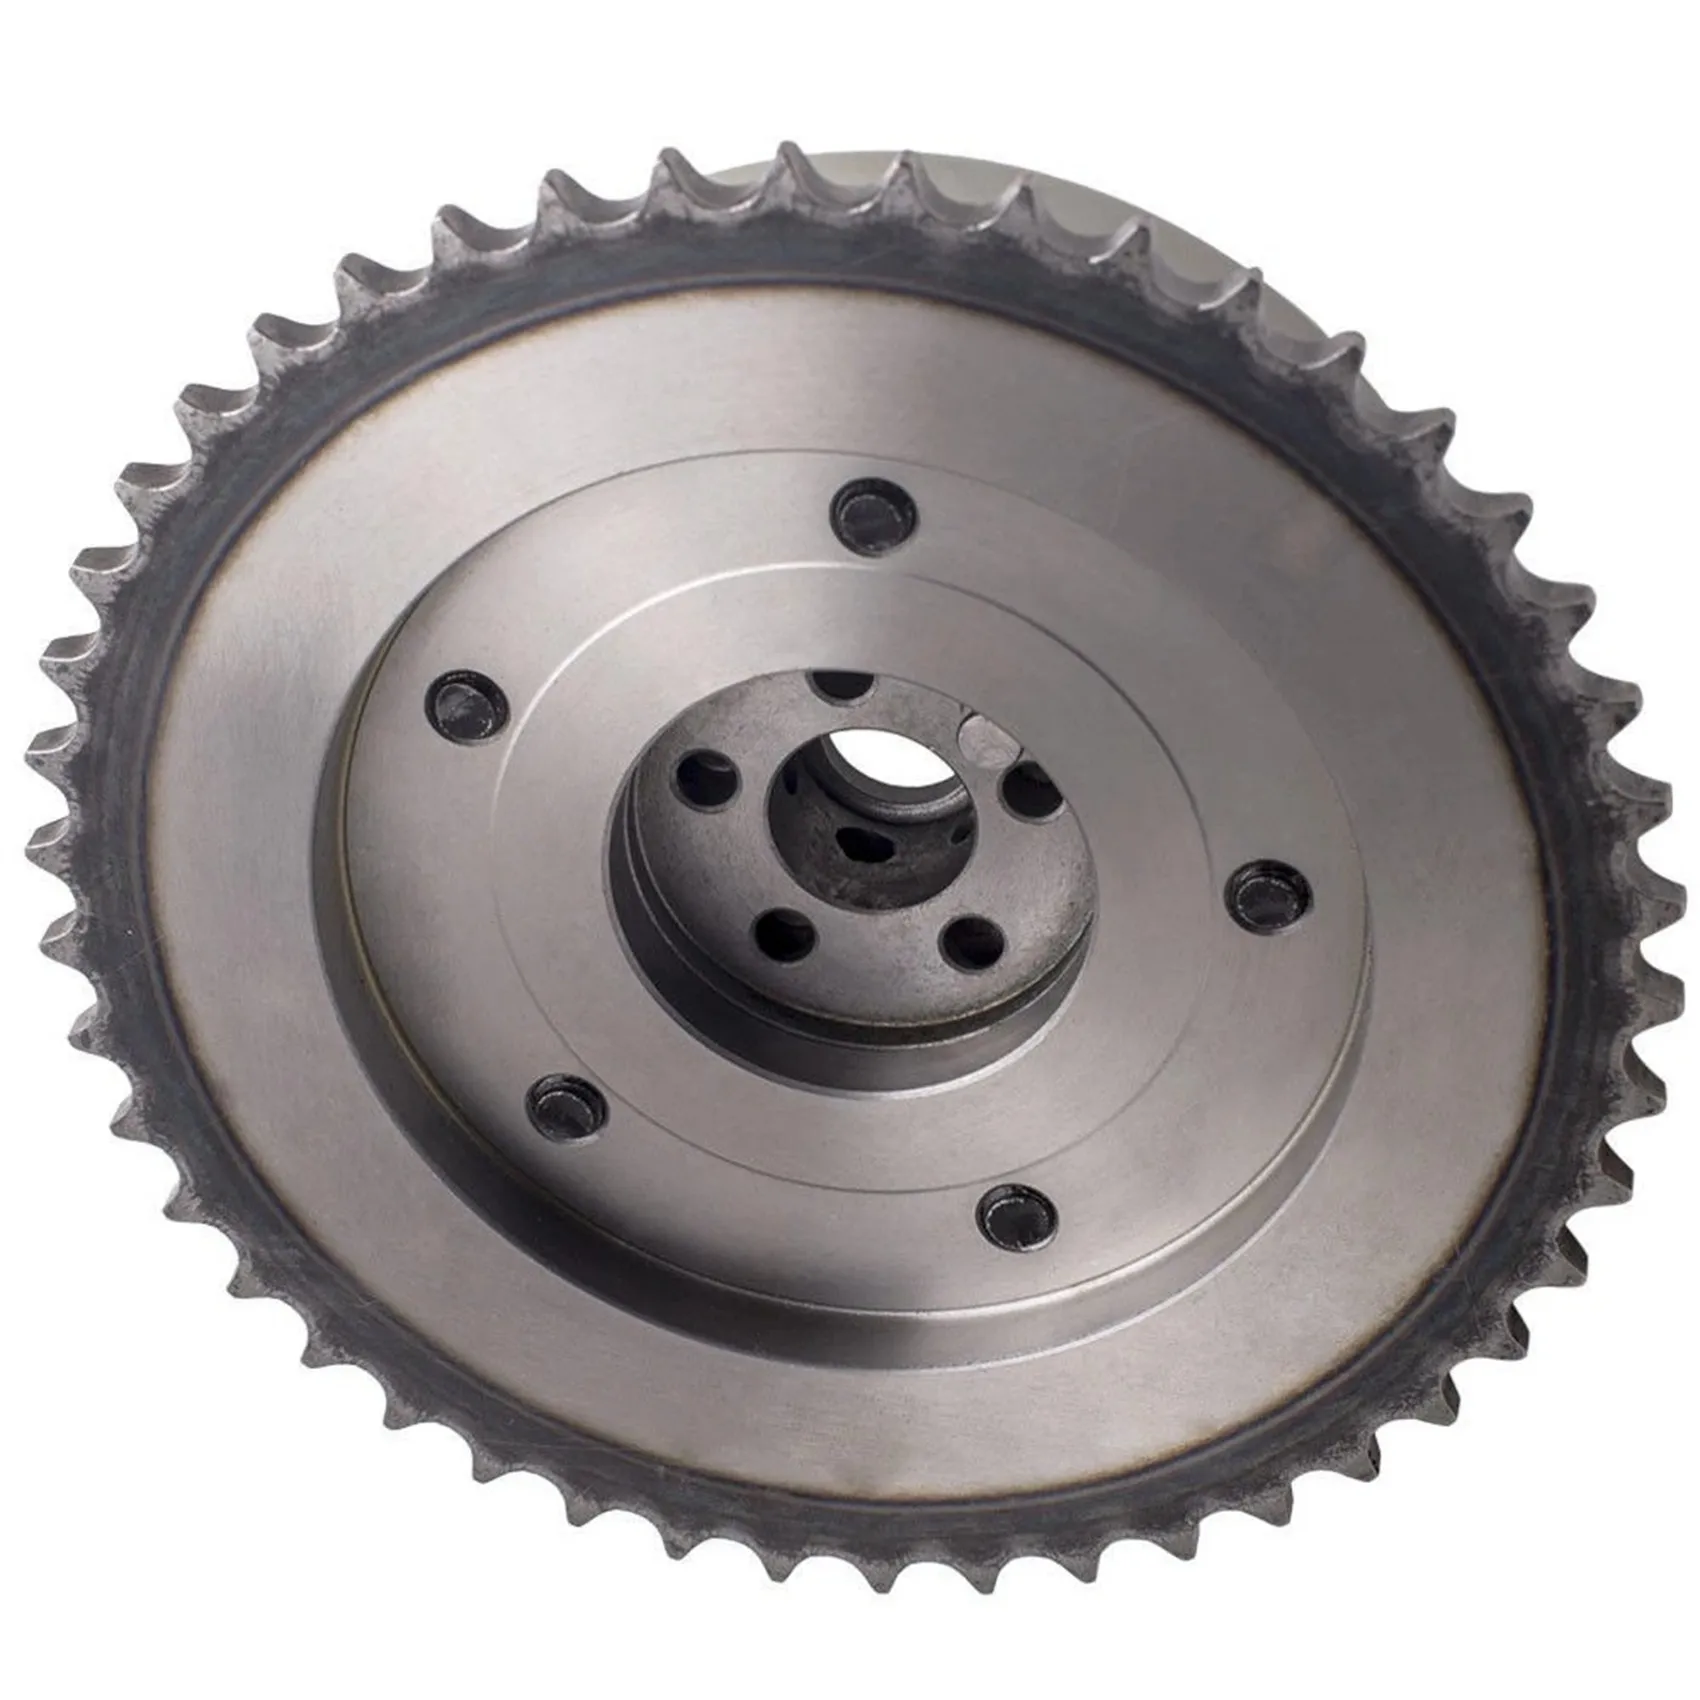 

Engine Variable Timing Sprocket Camshaft Gear for Buick Verano Chevy GMC Pontiac 12621505, 12578516